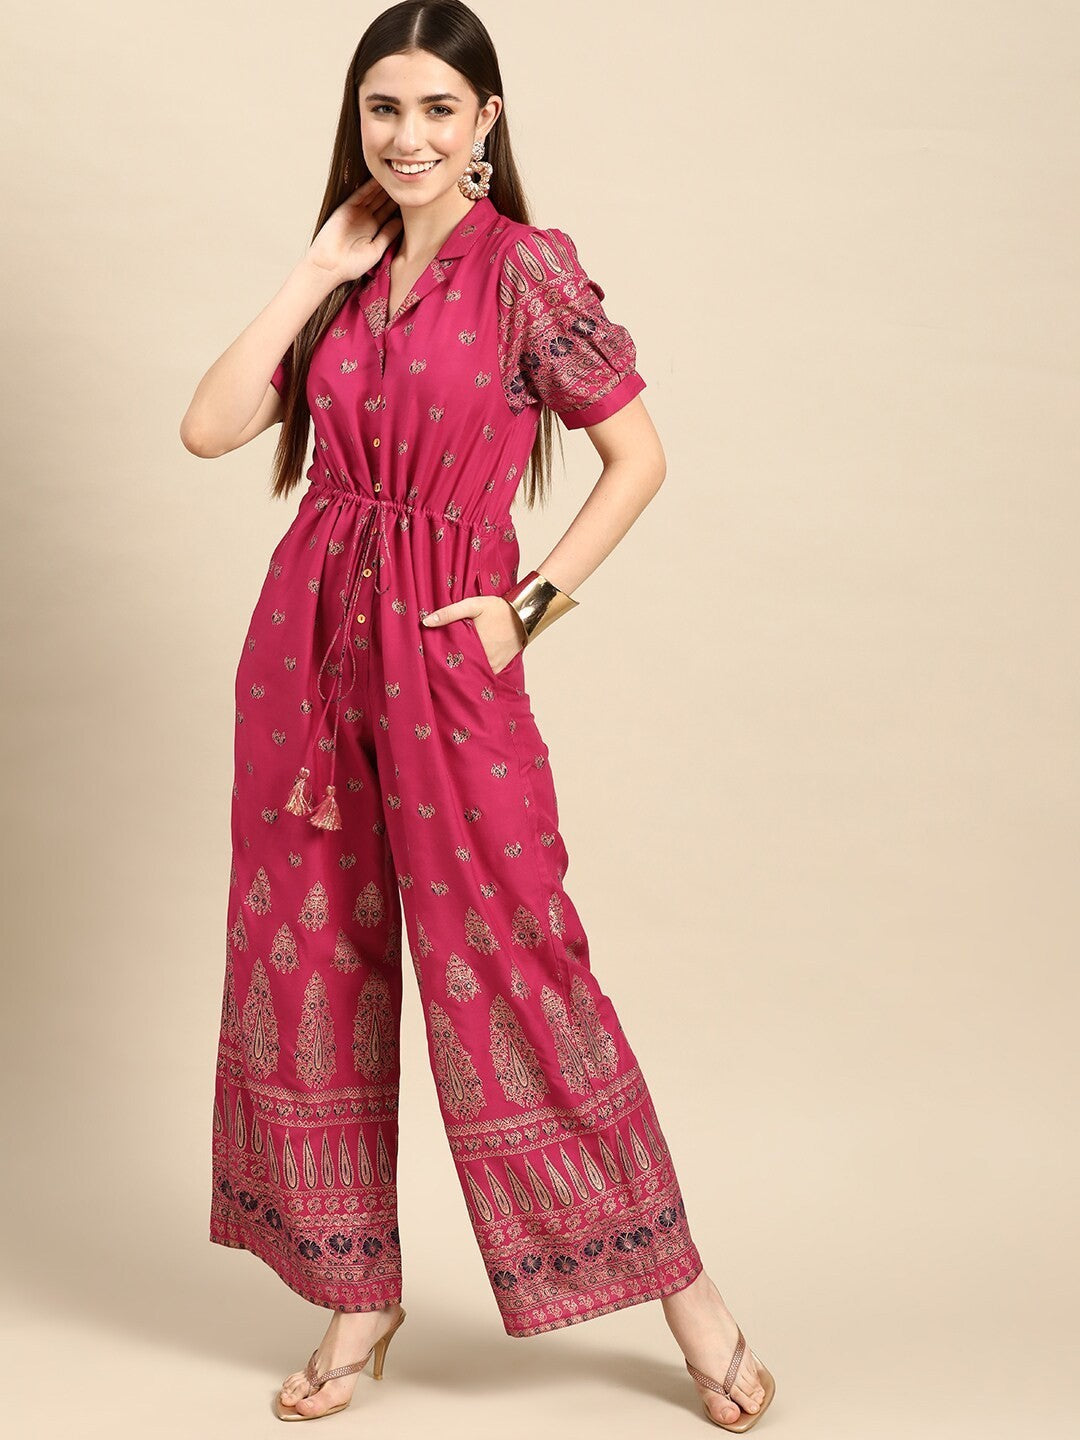 Latest Designs of High Quality jumpsuits For Women and girls ⭐